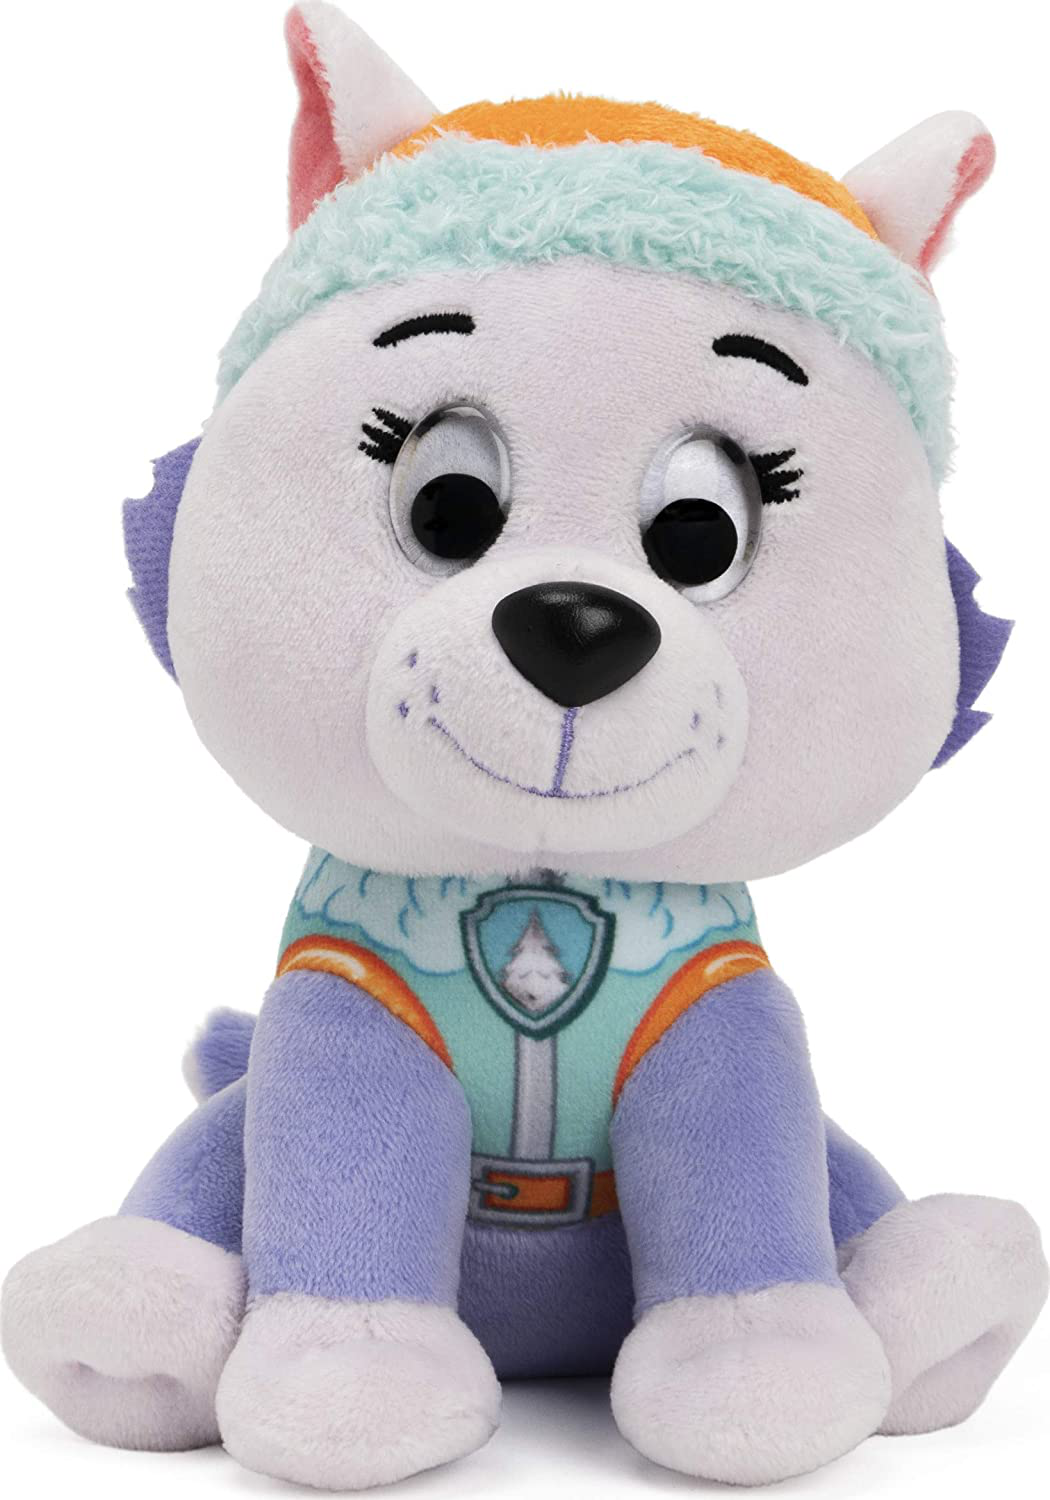 GUND Paw Patrol Chase in Signature Police Officer Uniform for Ages 1 and Up, 6"